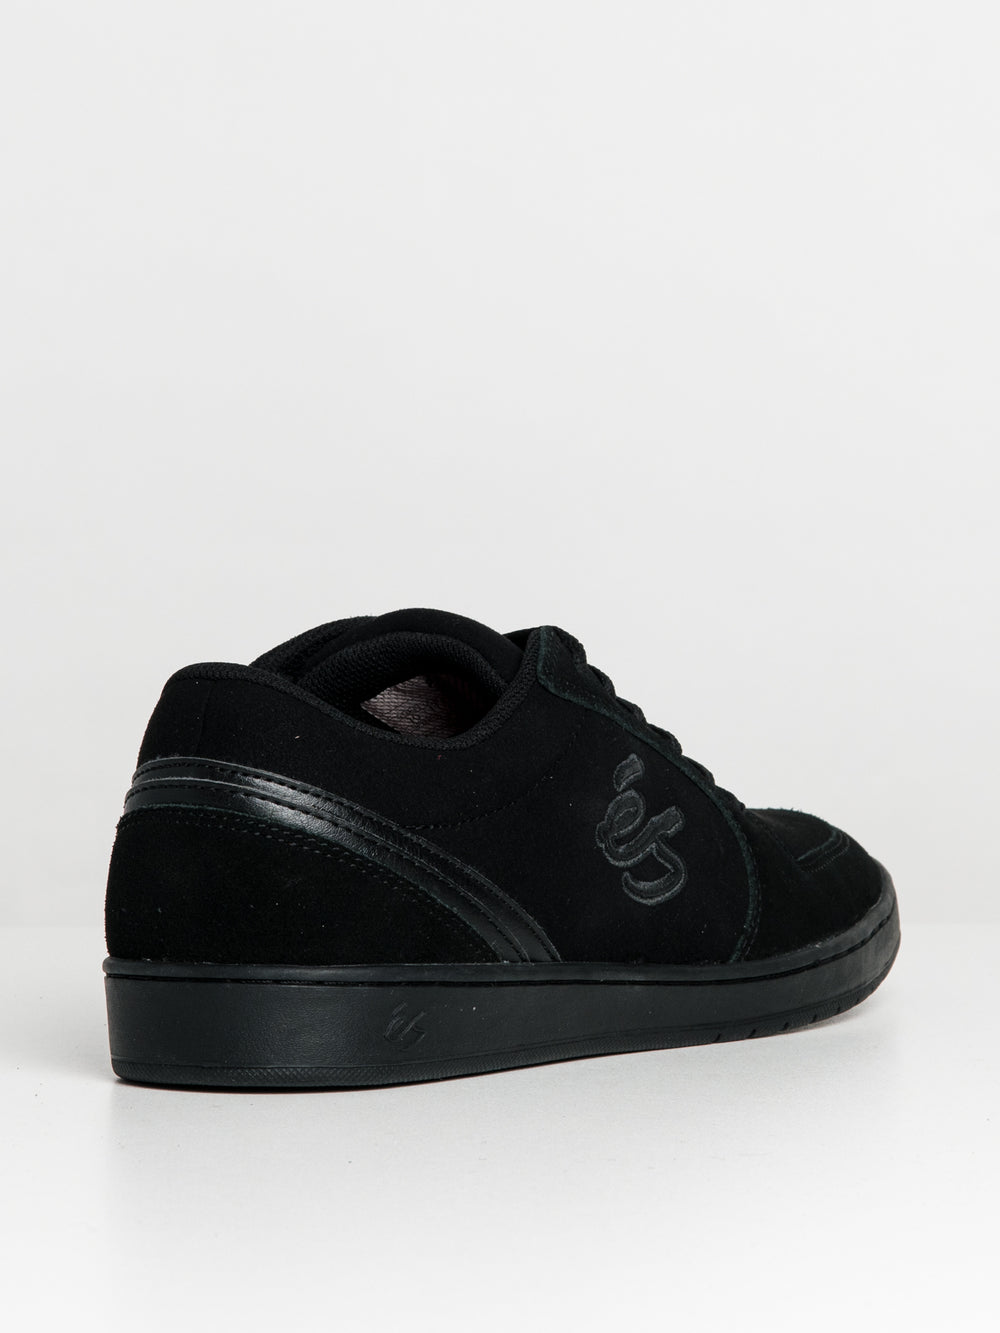 MENS ES SHOES EOS SNEAKER - CLEARANCE